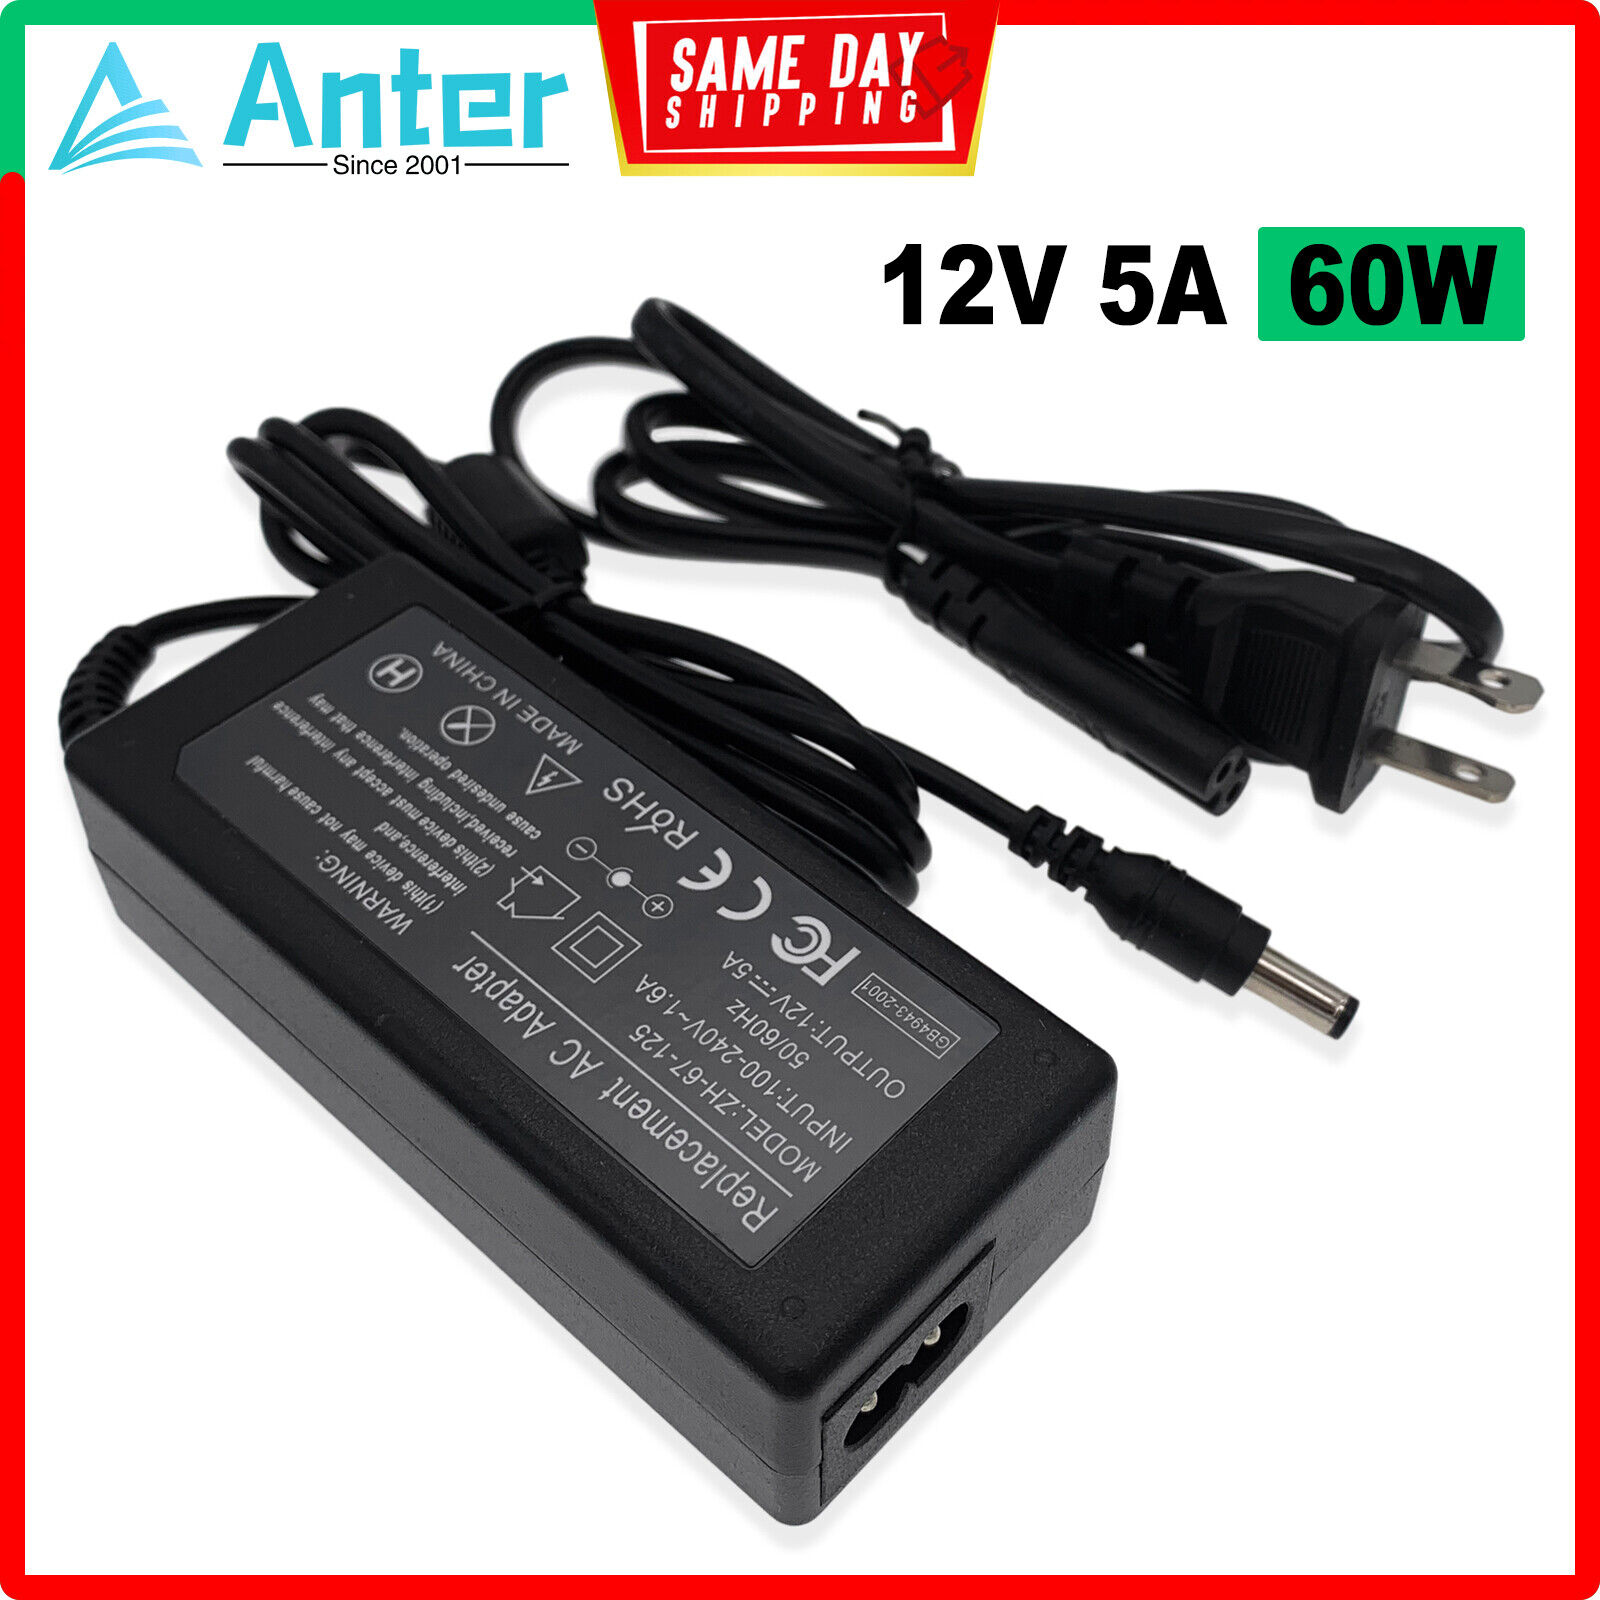 60W AC Adapter Charger Power Supply for Roland PSB-7U PSB-3U ACG-120 ASA-120